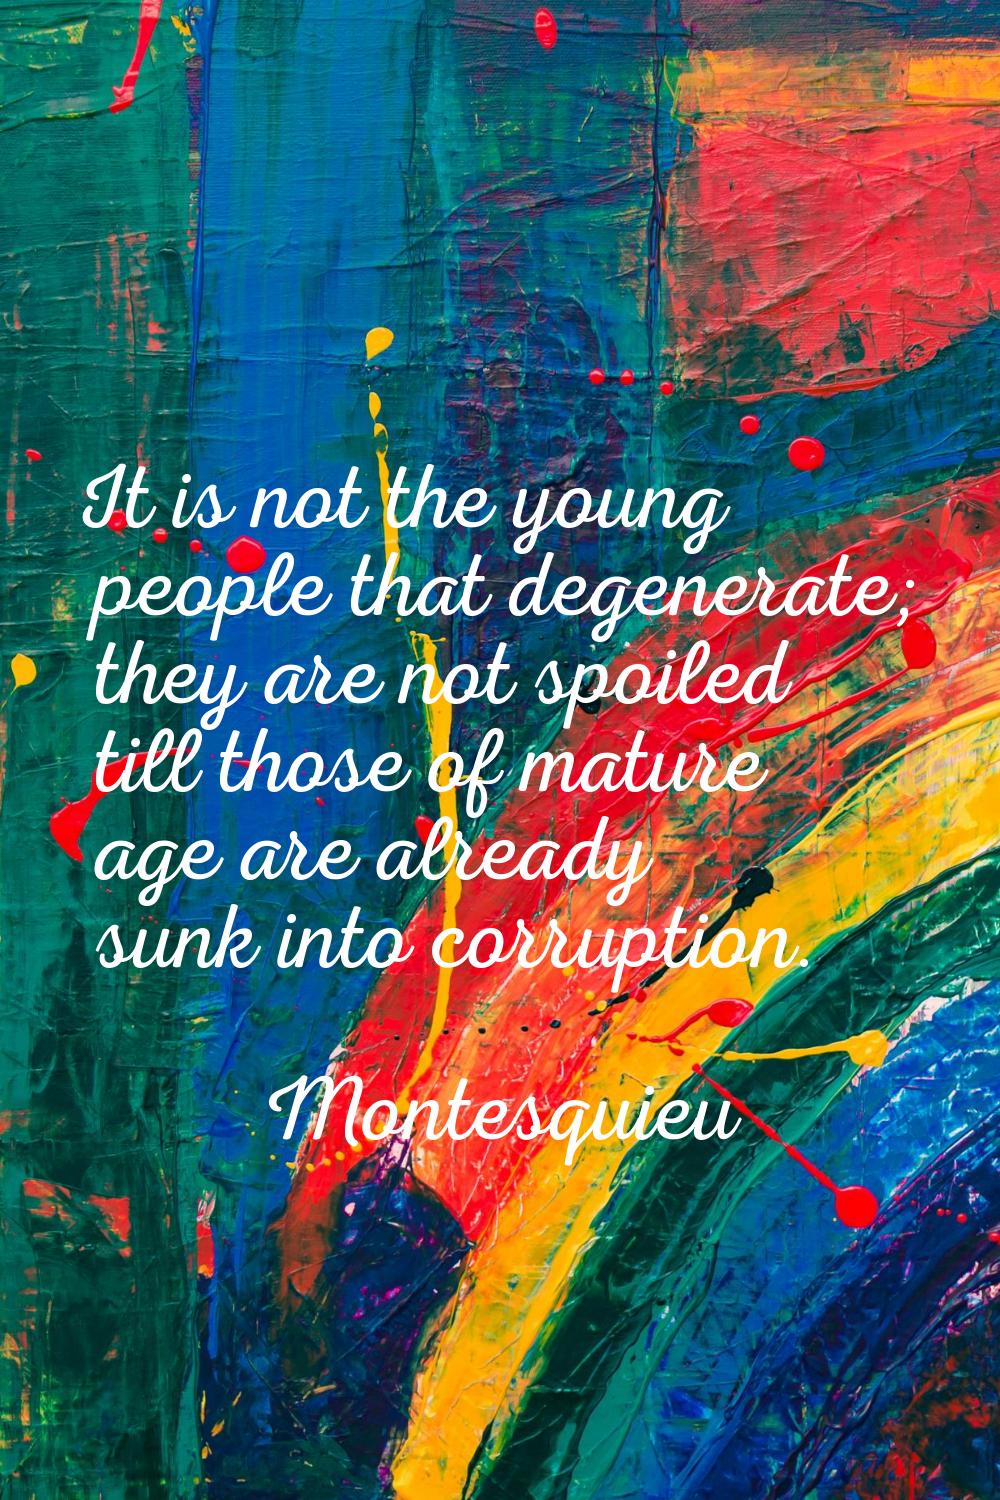 It is not the young people that degenerate; they are not spoiled till those of mature age are alrea